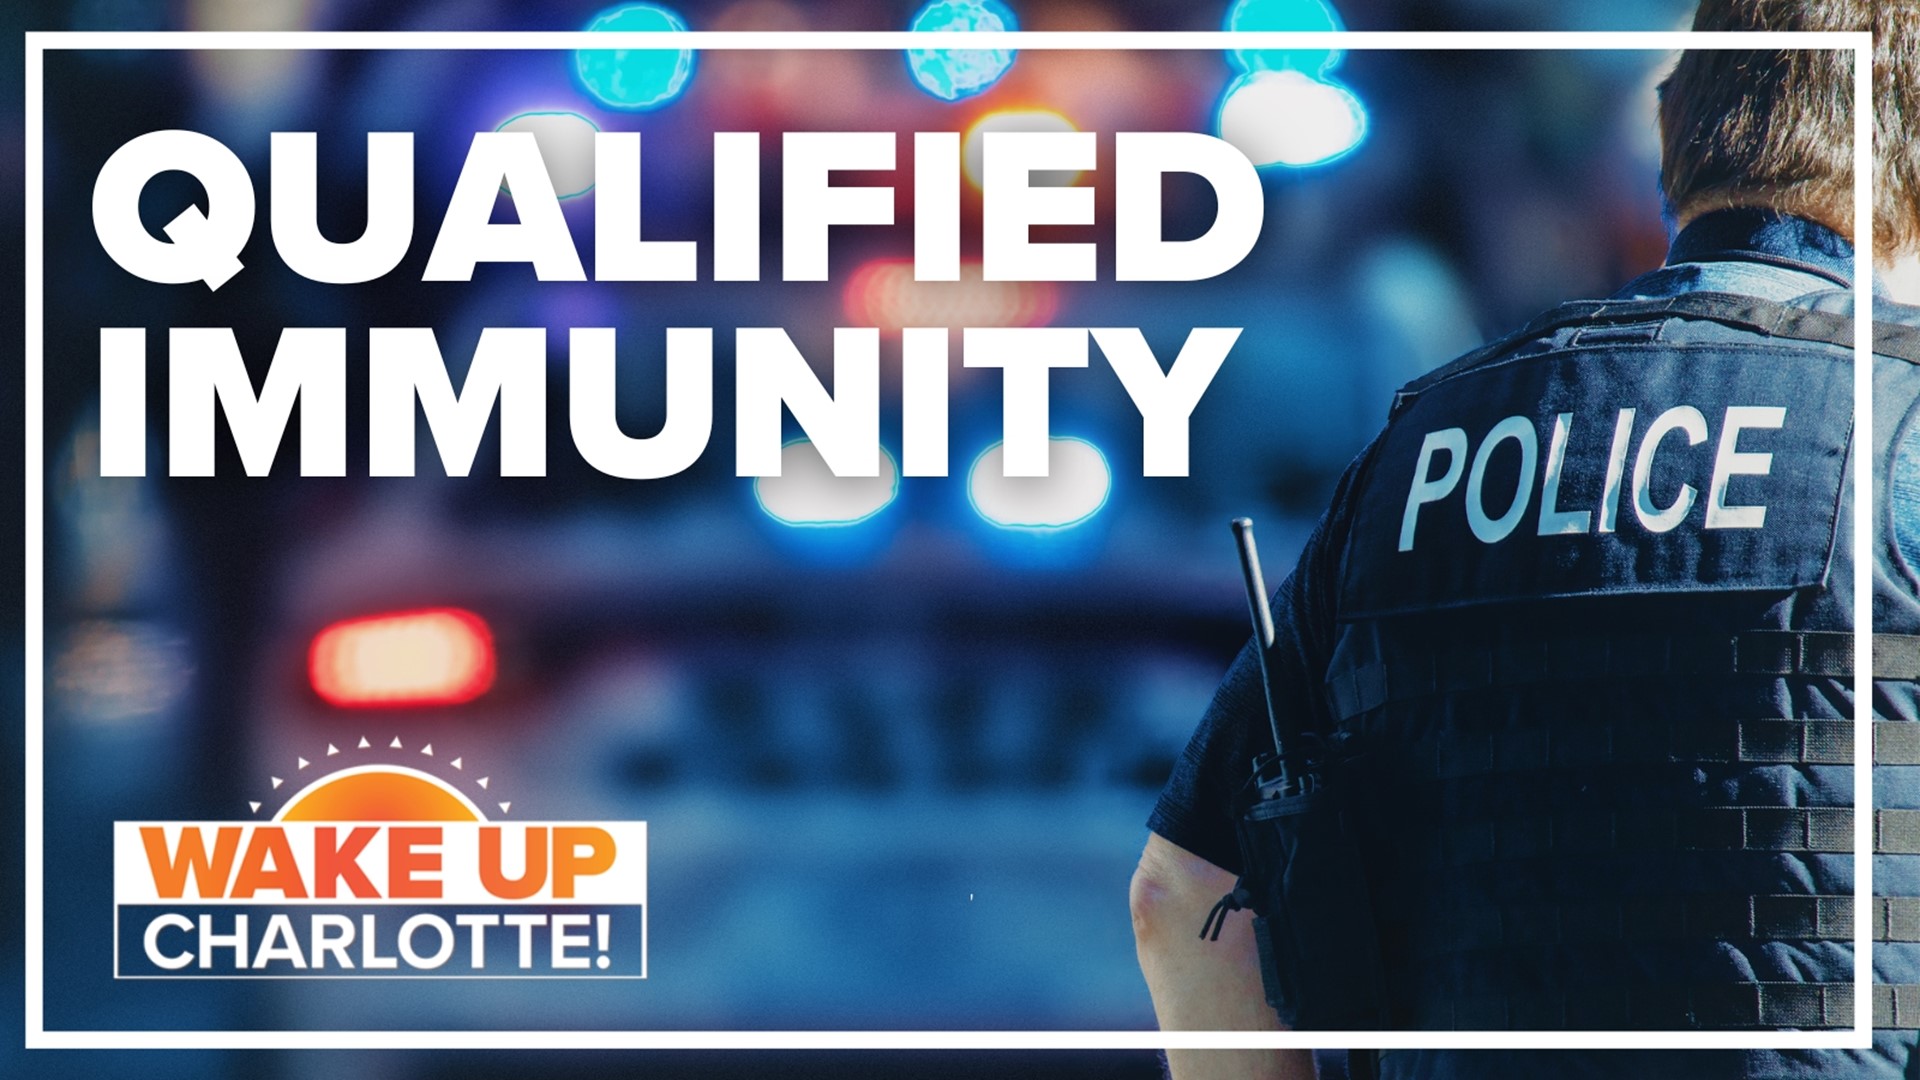 Qualified immunity was established by the Supreme Court in 1967. It keeps people from suing state and local officials, including law enforcement.